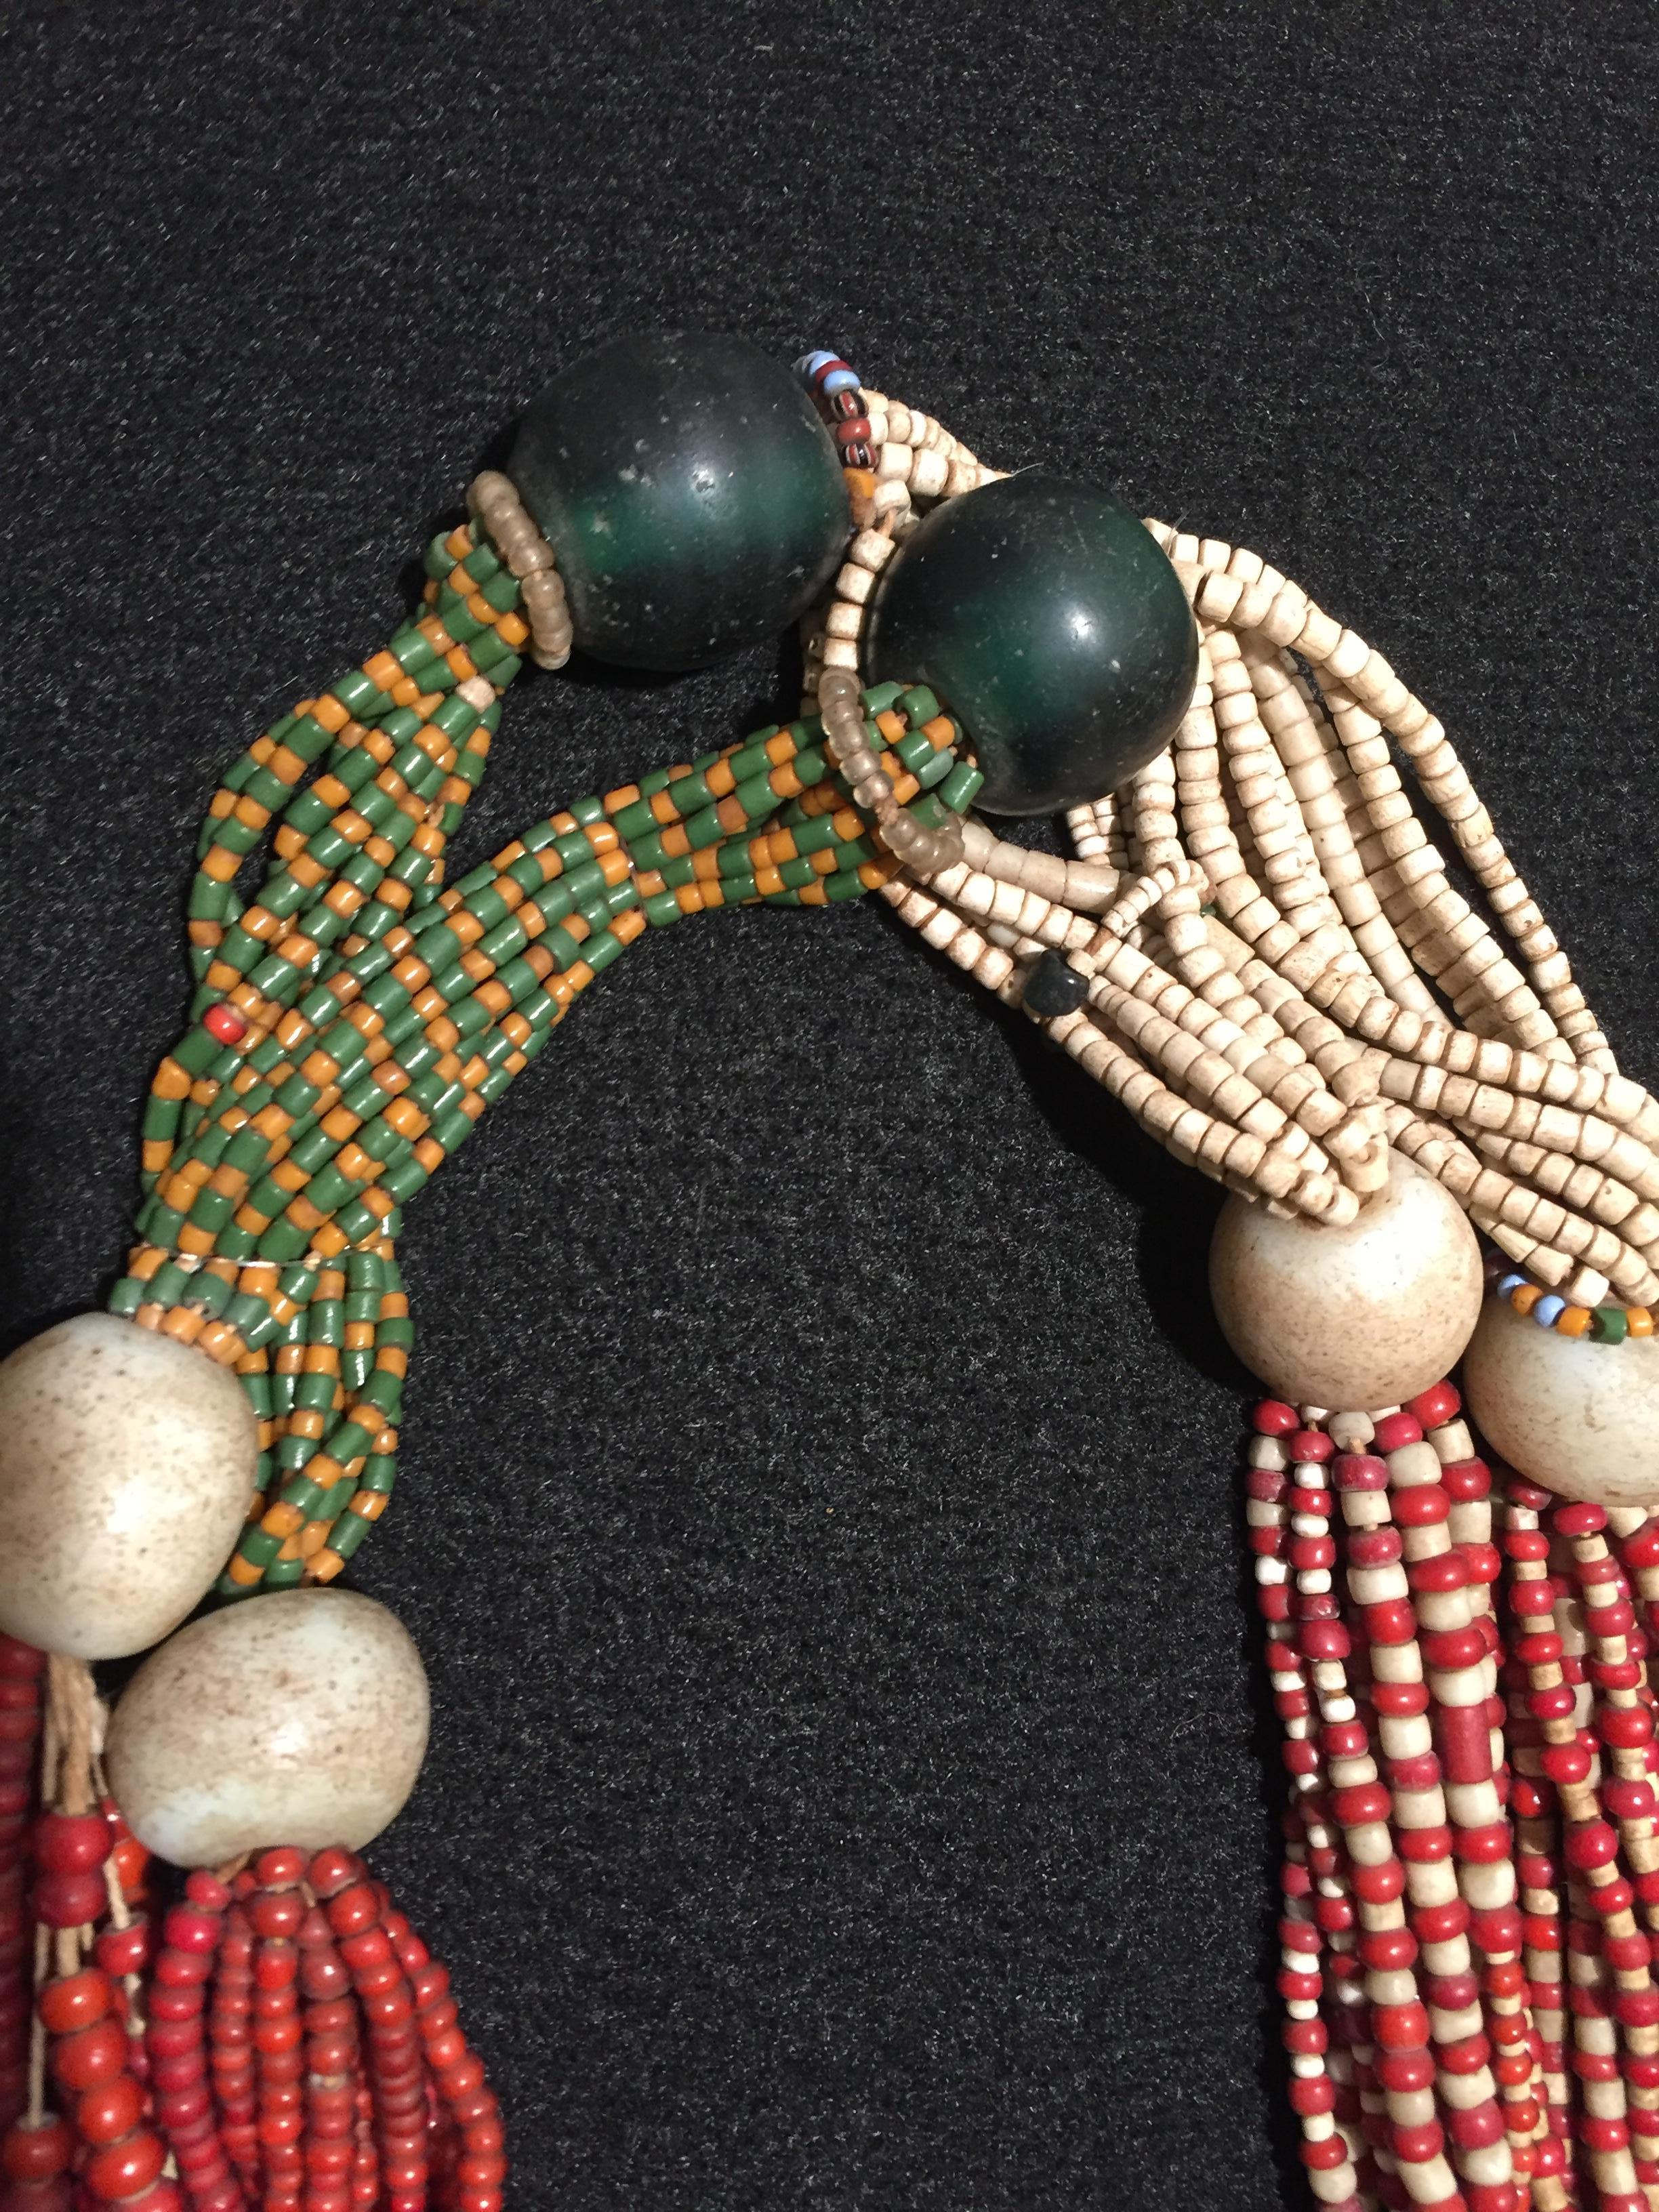 20th Century Yoruba African Diviner's Necklace with Glass Beads